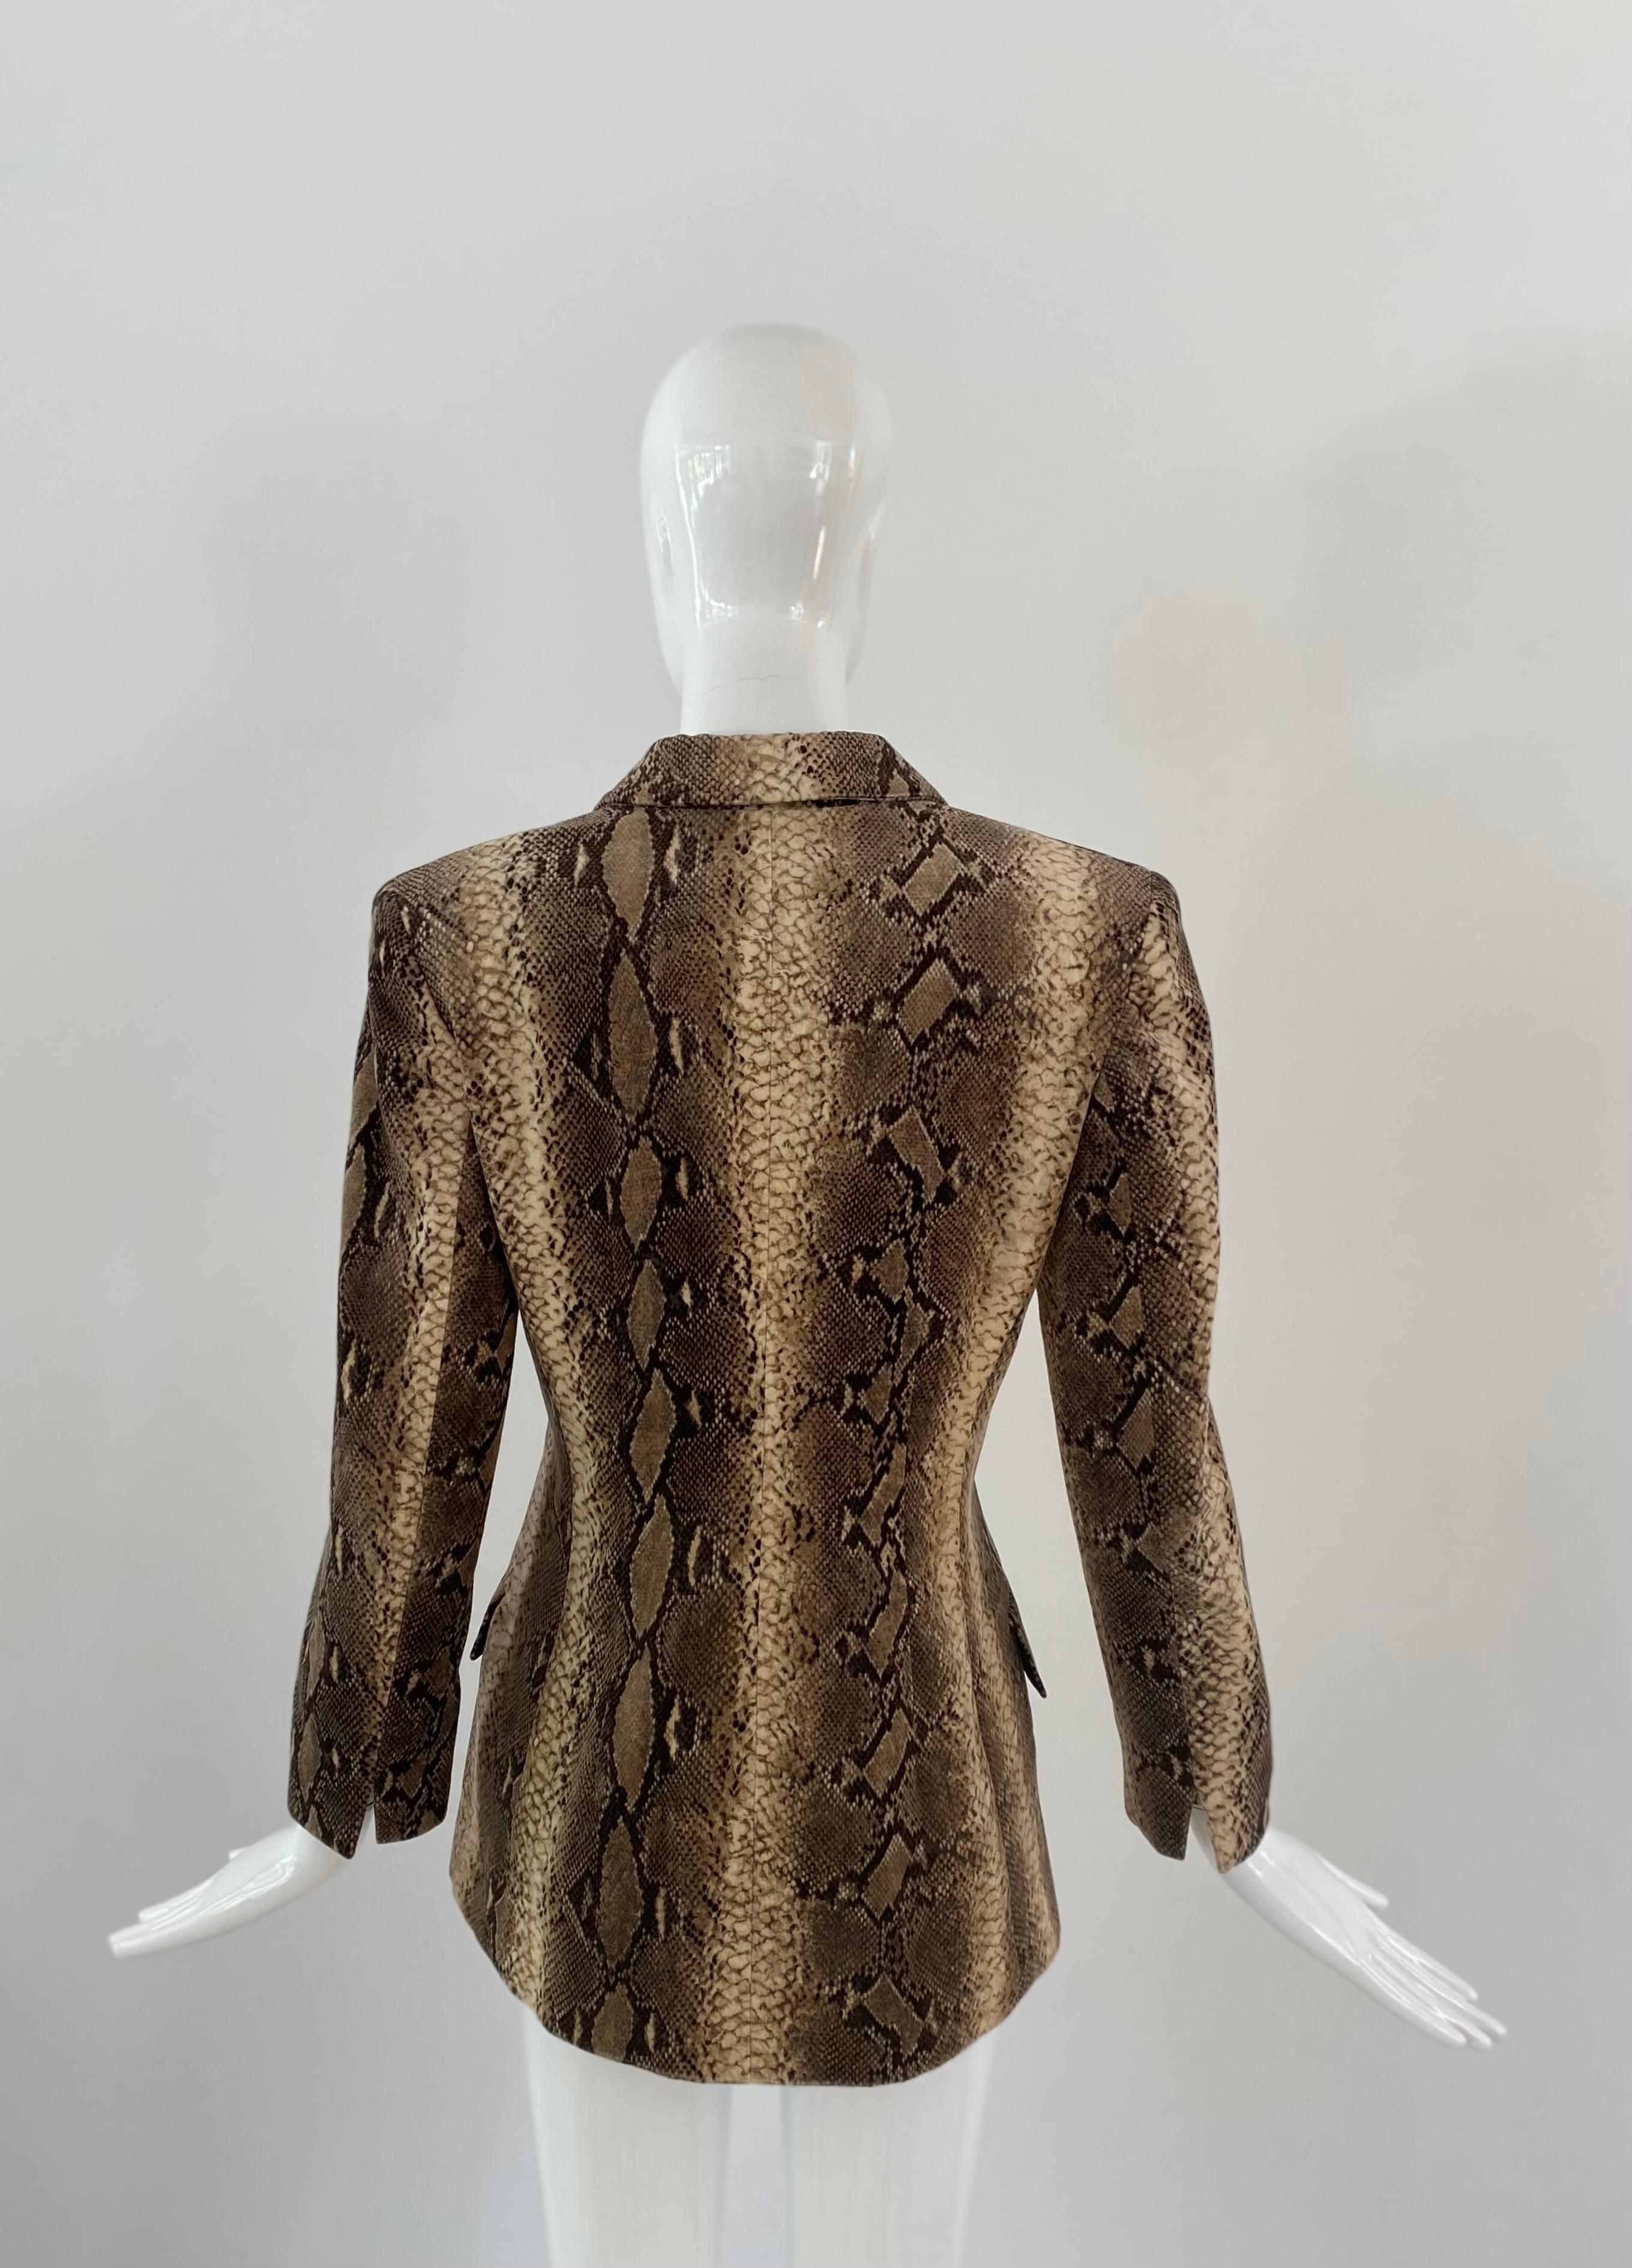 1990s Valentino  'Miss V' velvet blazer in a lush snakeskin print of browns and tan color with six tortoiseshell and gold buttons. This jackets adds a little edge while being essentially a neutral. 

Slim and long fit. Fully lined and two external